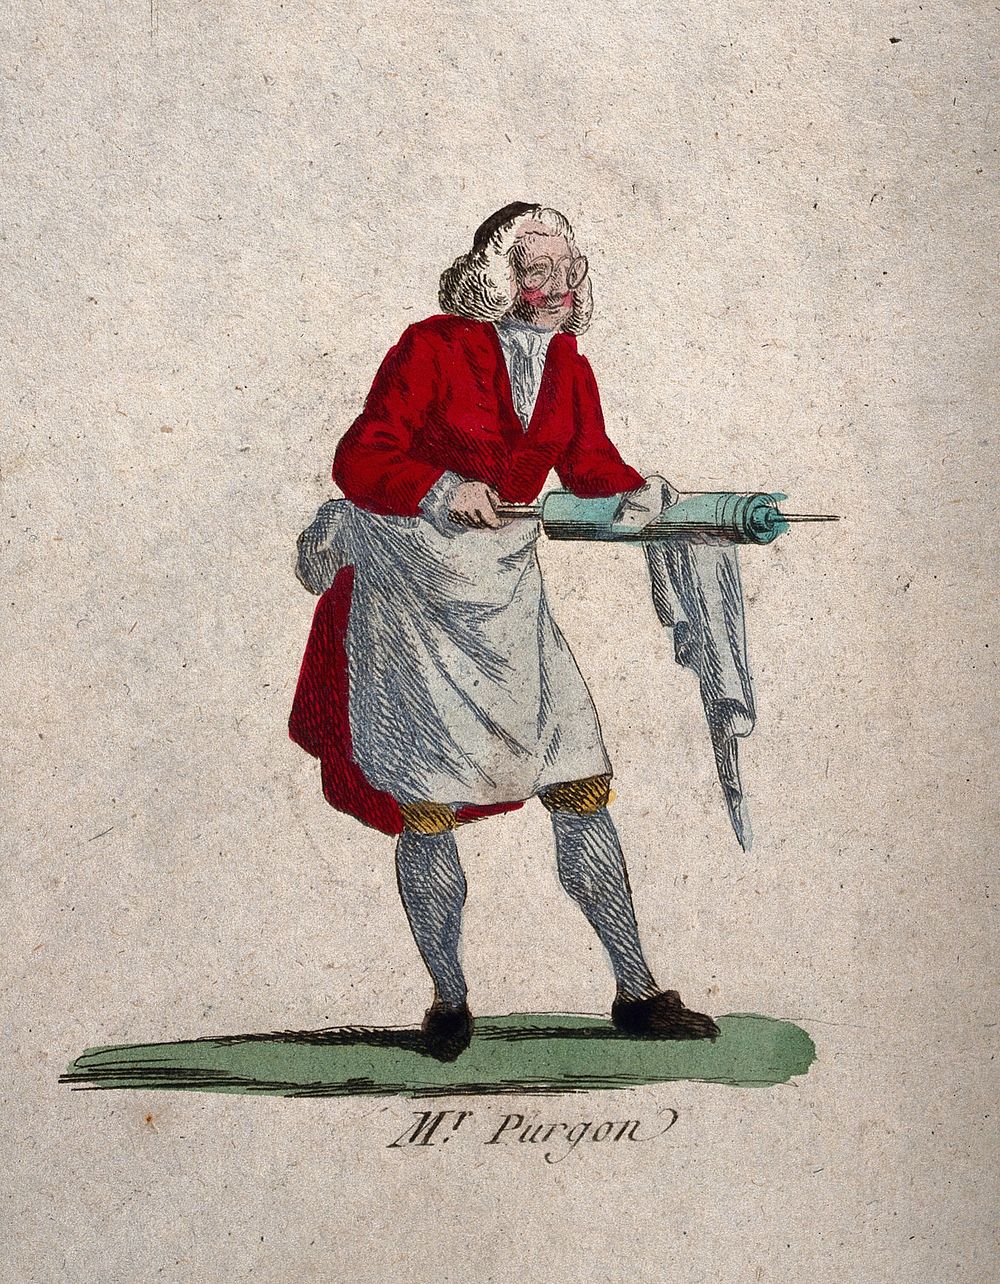 Doctor Purgon, a physician from Molière's play Le malade imaginaire. Coloured etching.